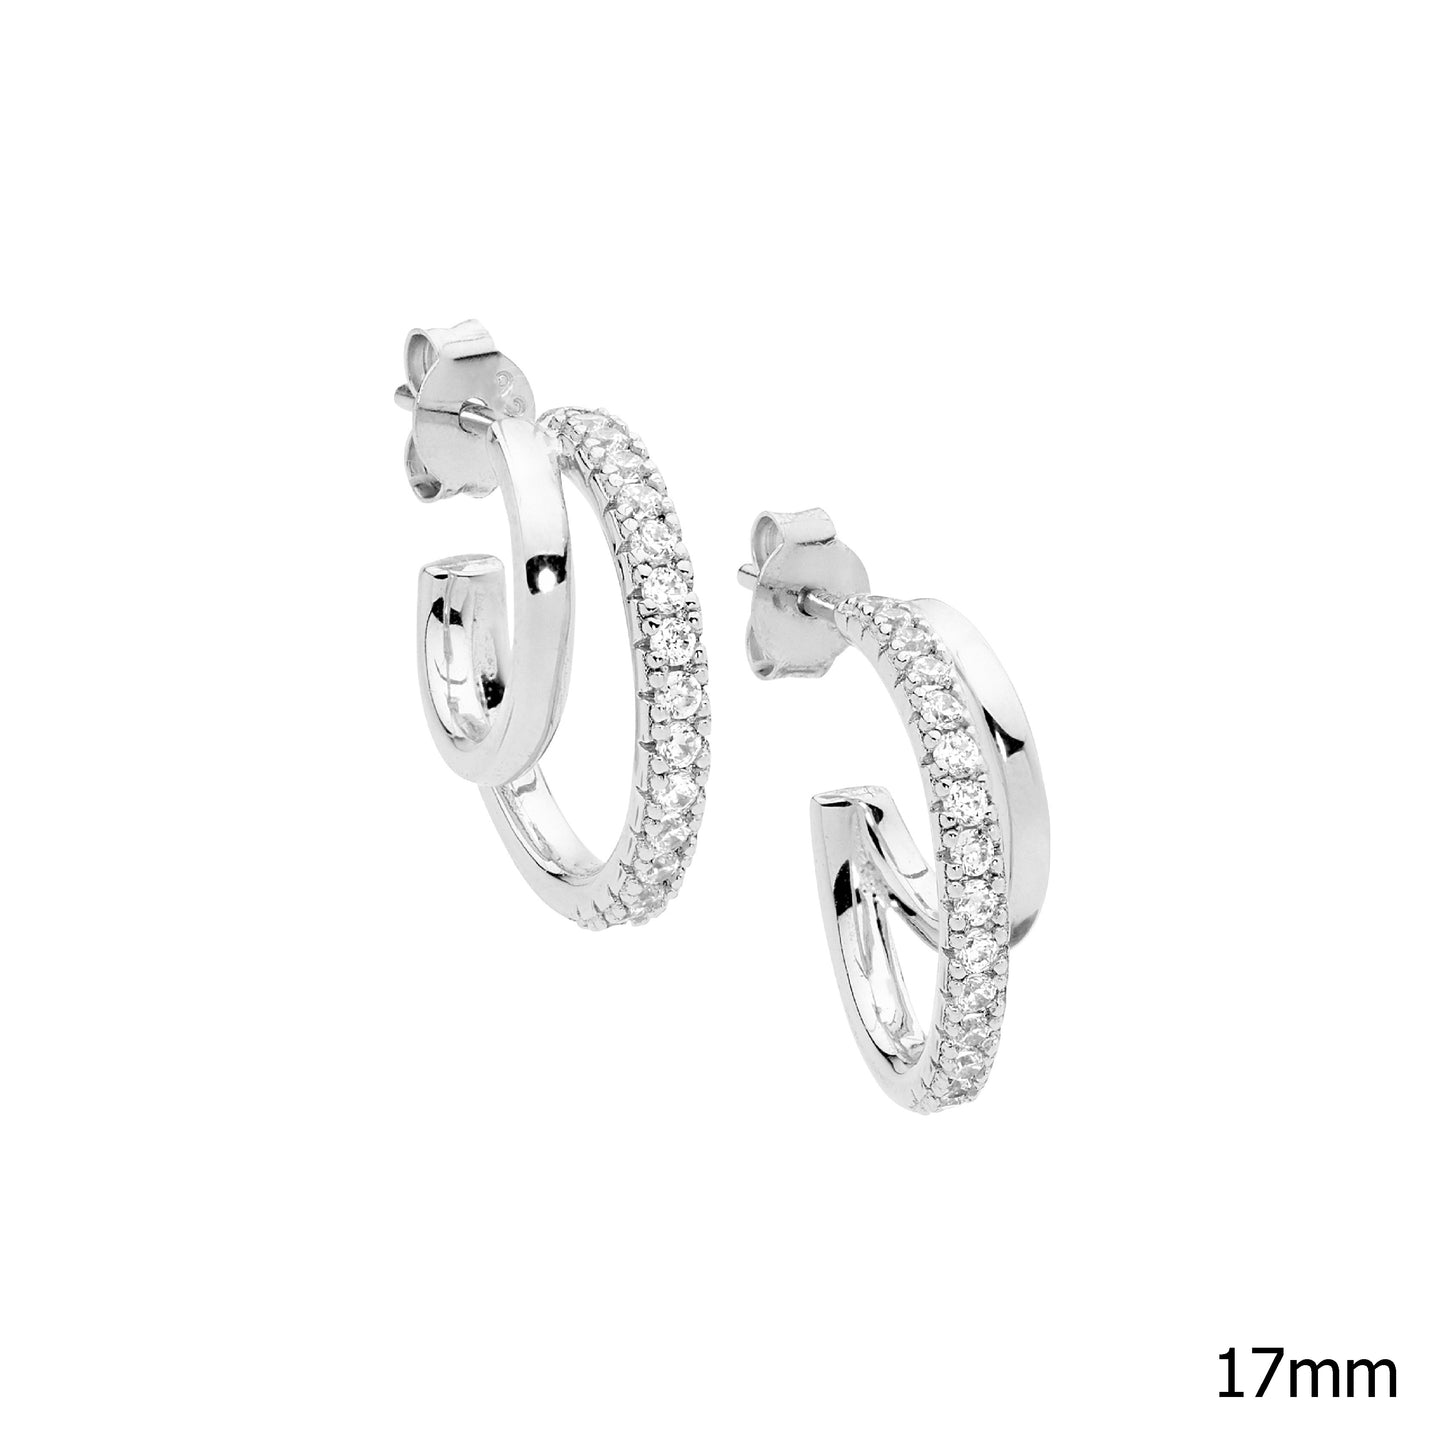 Silver Double Hoop Earrings with Crystals